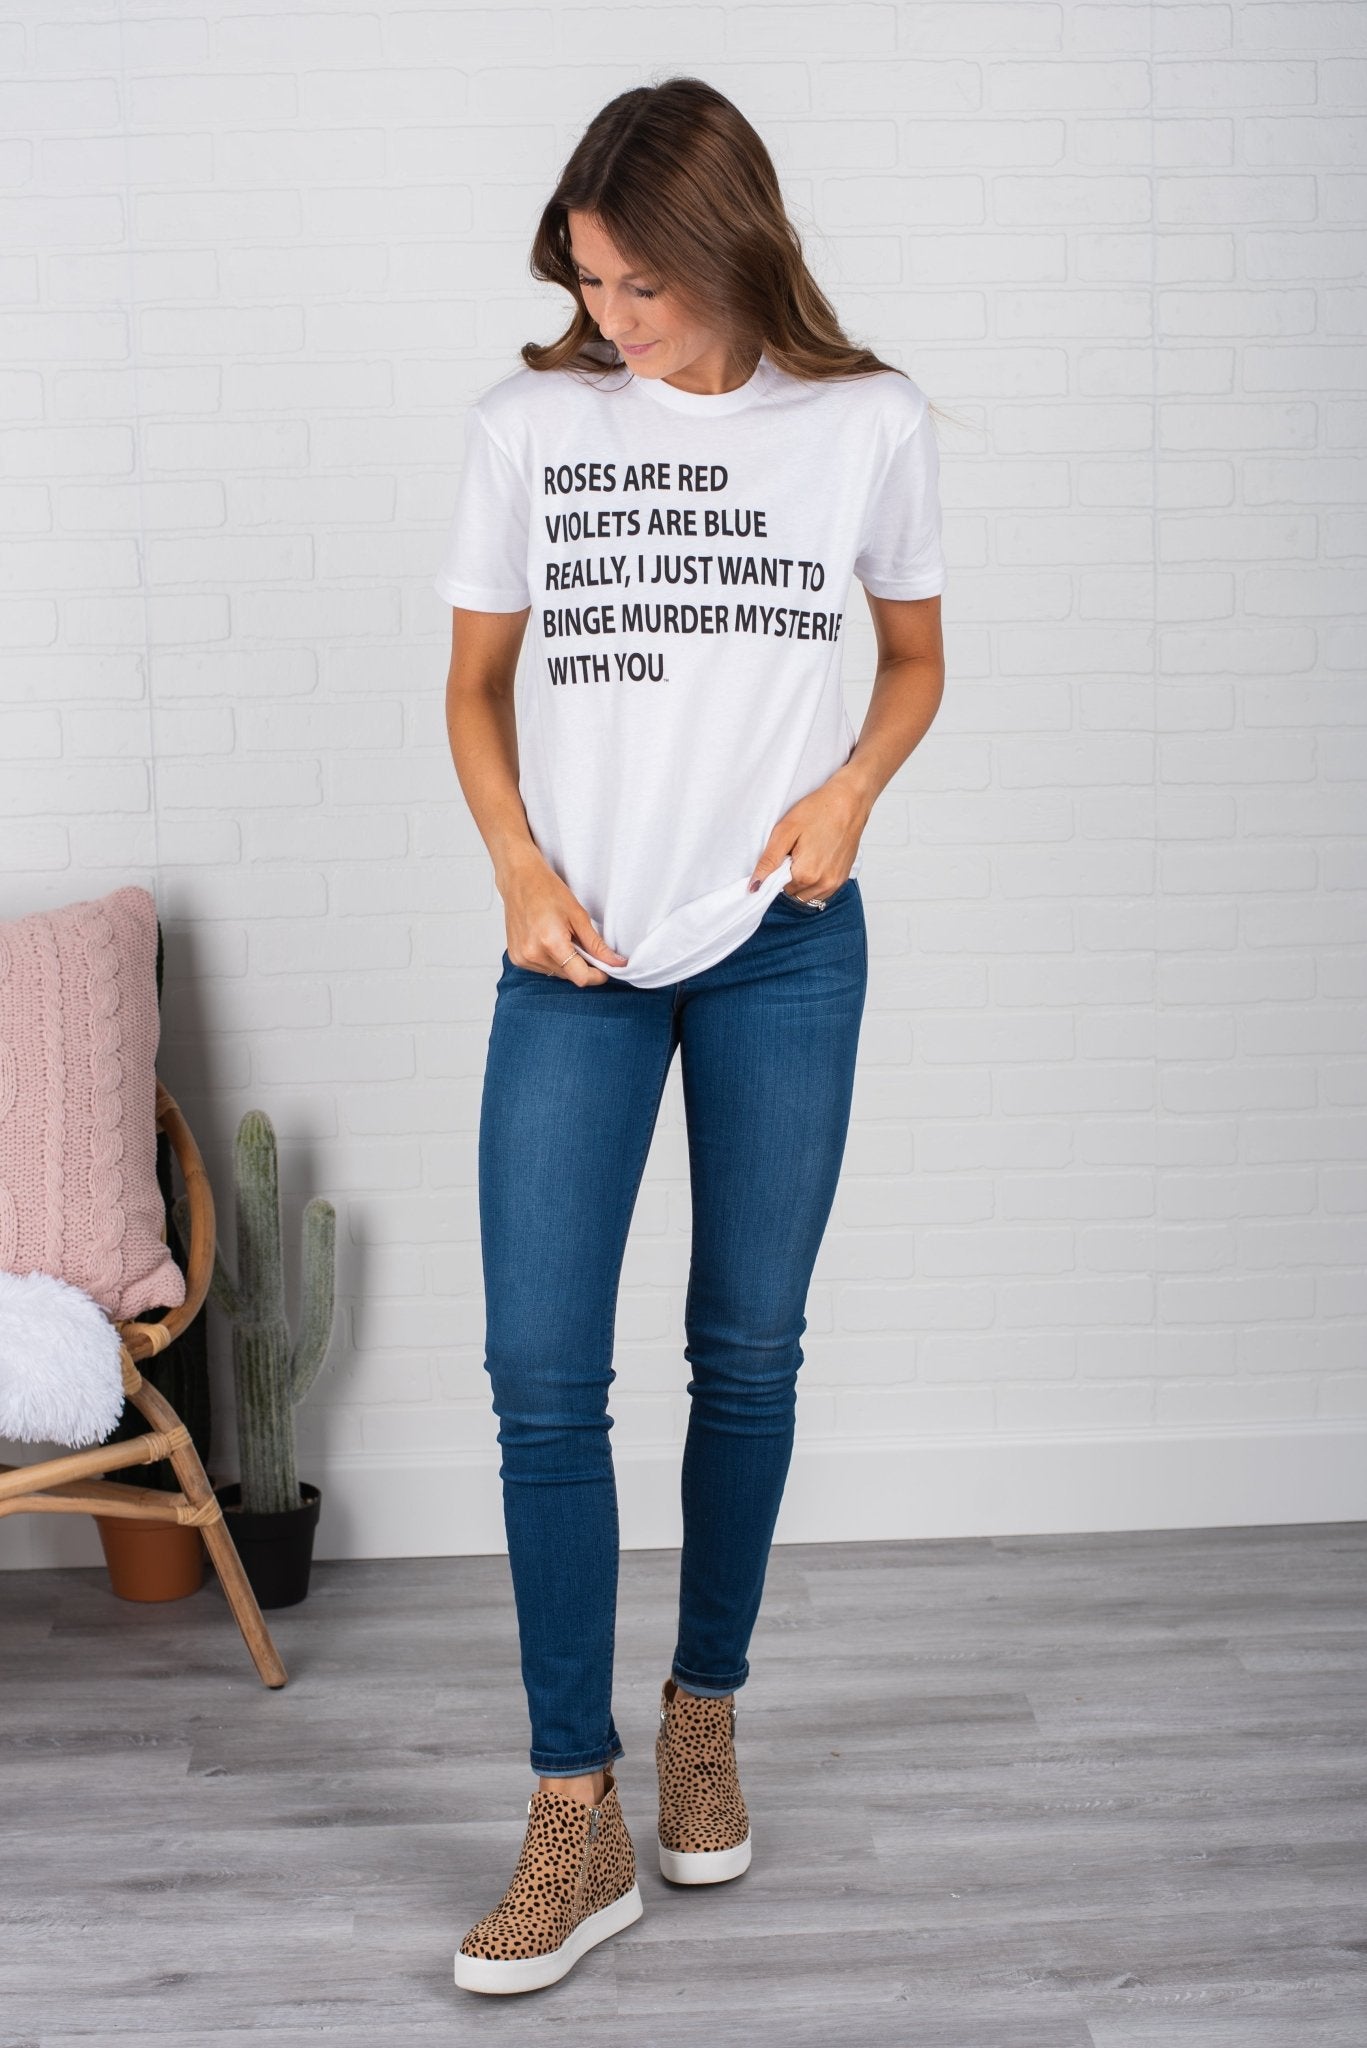 Murder mystery unisex short sleeve t-shirt white - Adorable T-shirts - Unique Tank Tops and Graphic Tees at Lush Fashion Lounge Boutique in Oklahoma